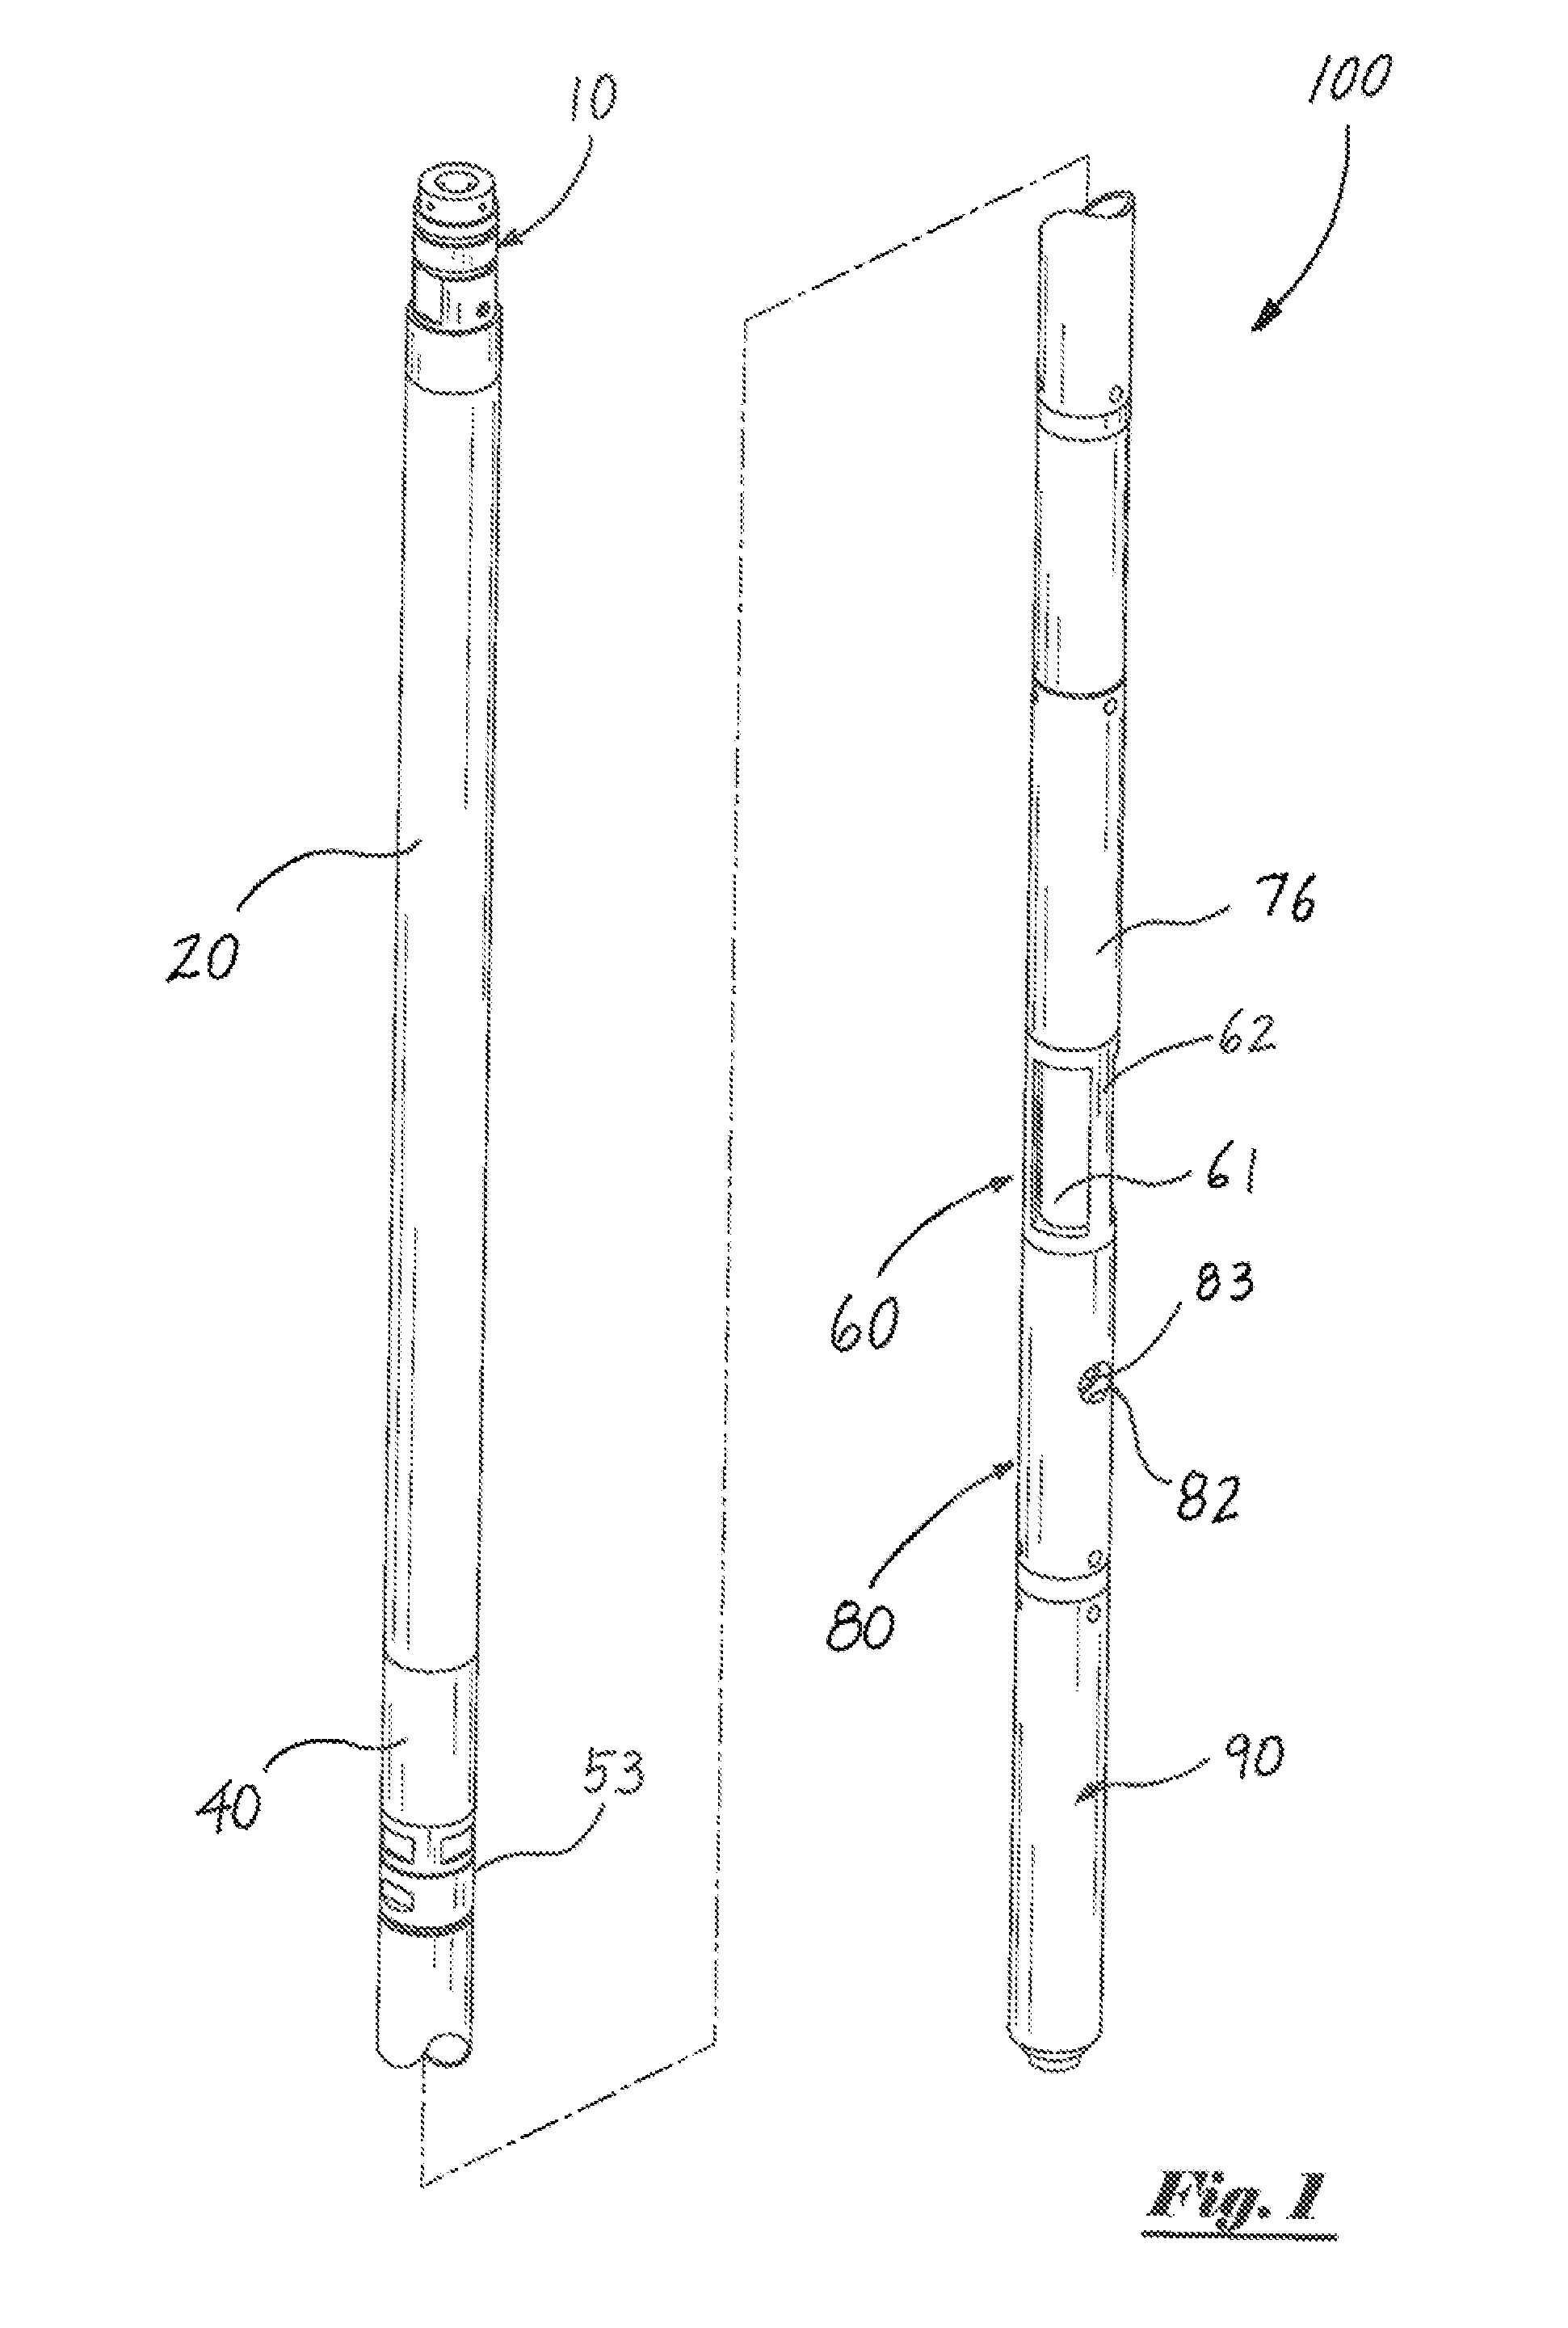 Side view downhole camera and lighting apparatus and method